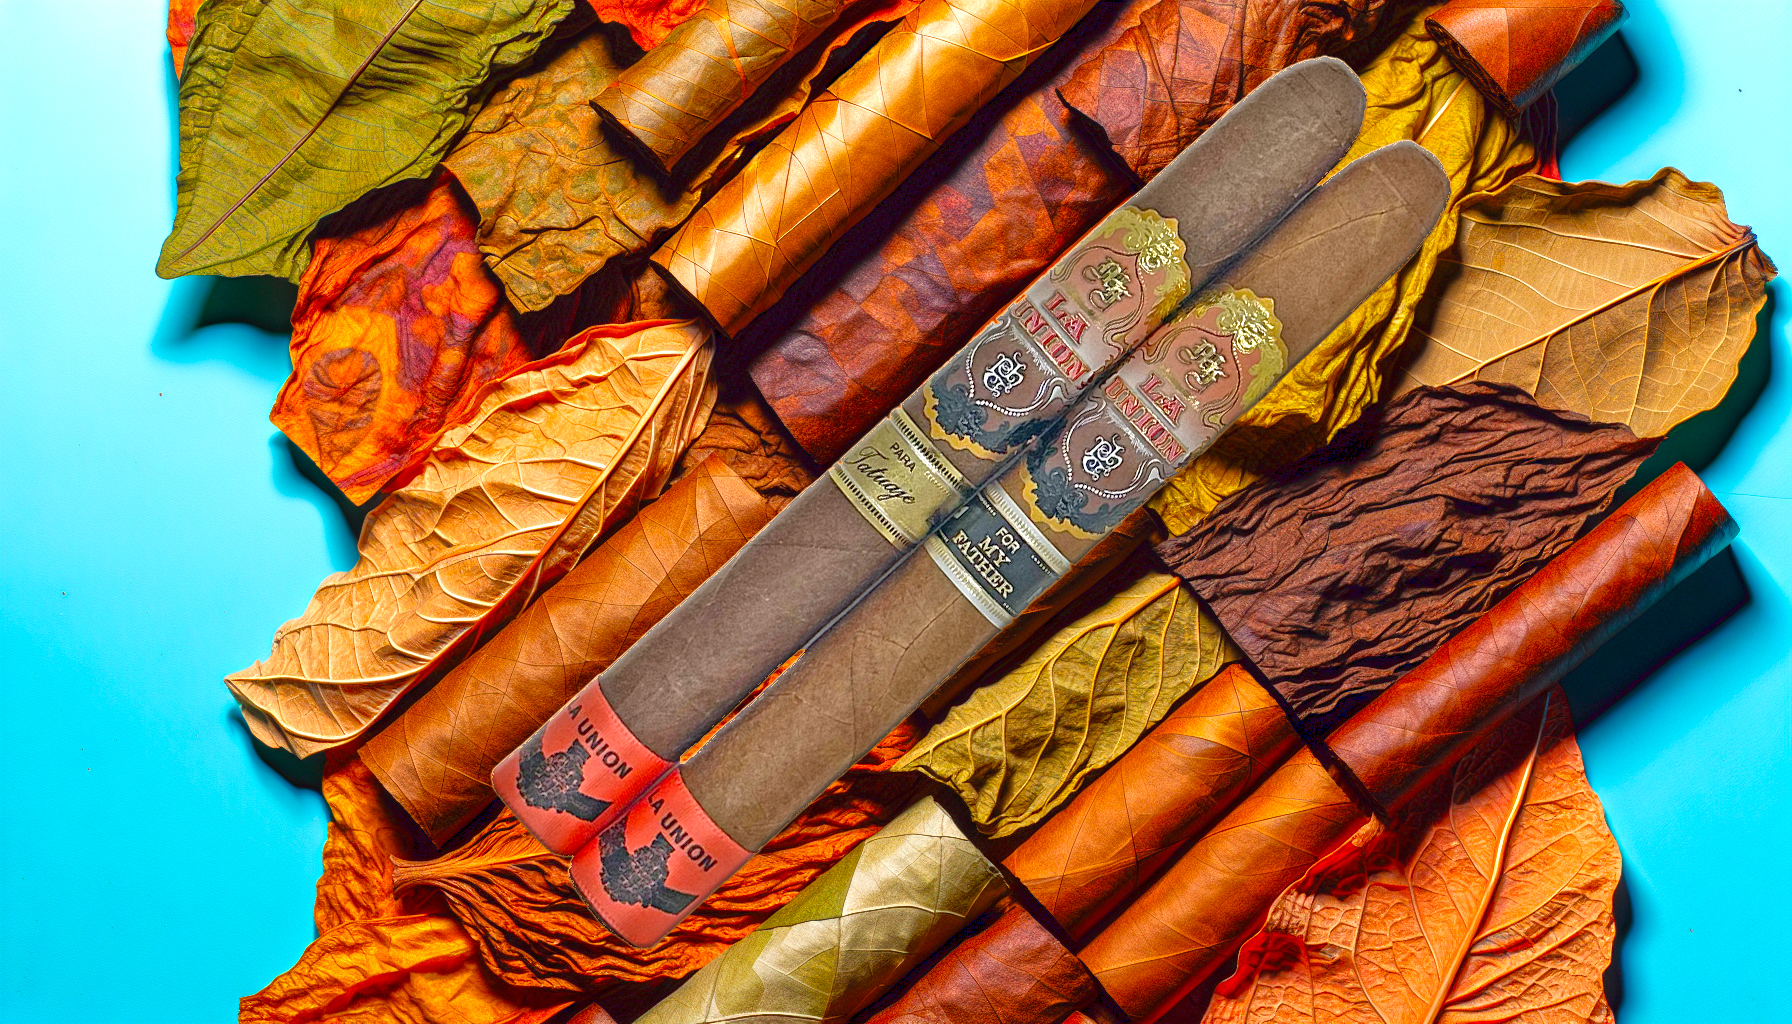 Variety of premium cigar wrappers and tobacco leaves arranged in a pattern